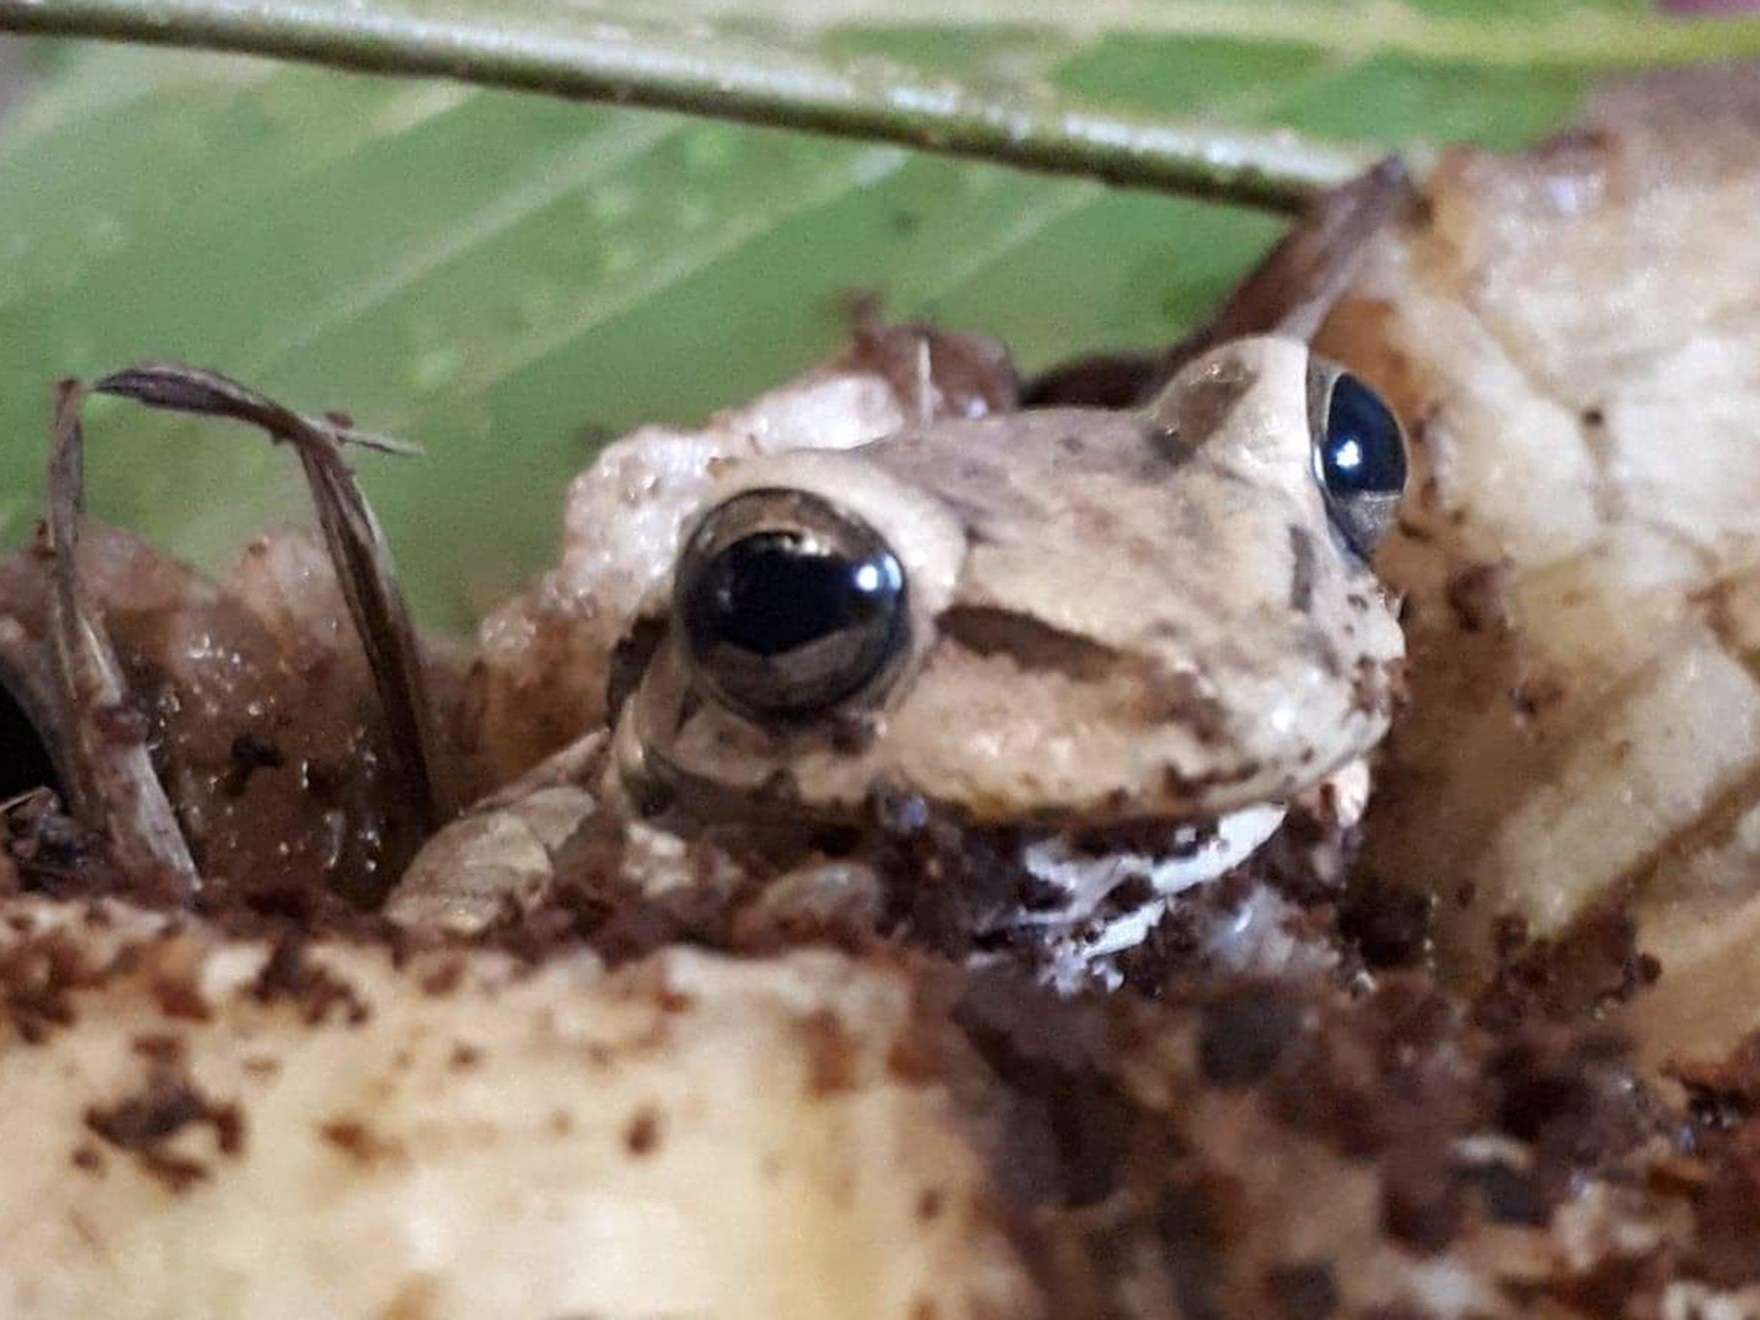 frog-found-in-supermarket-banana-delivery-transported-from-colombia-to-wales